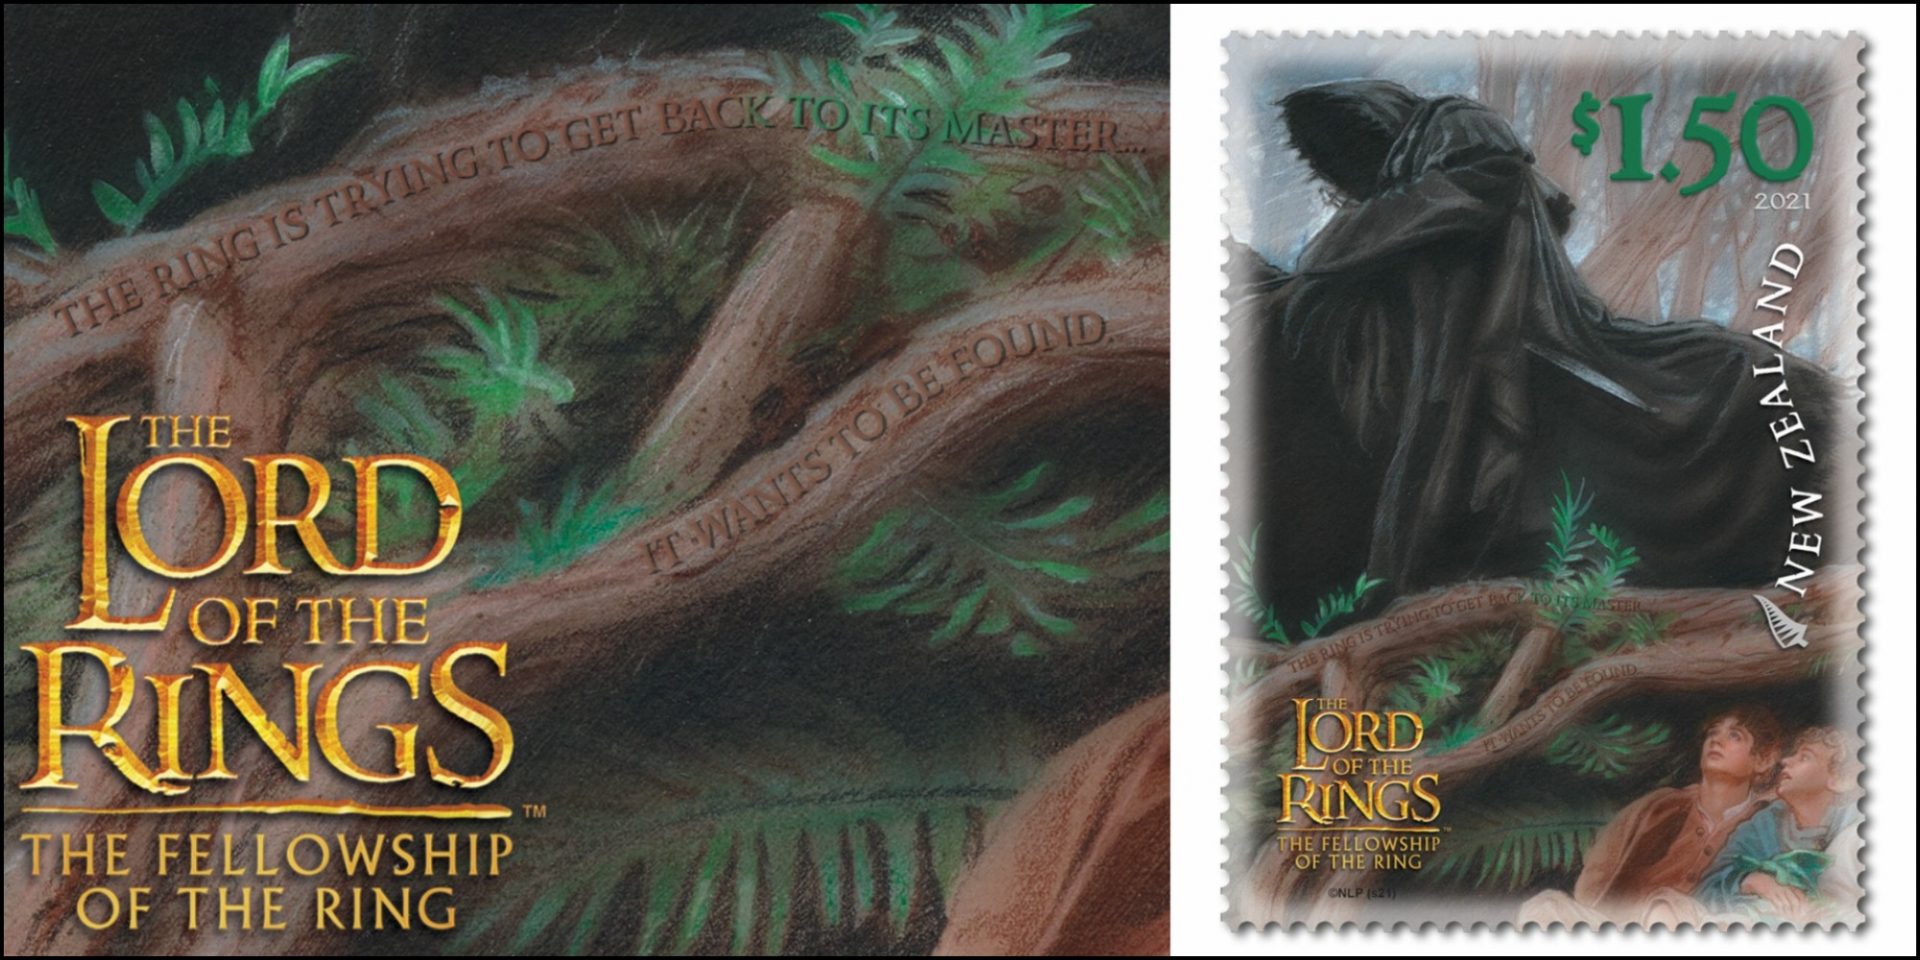 LOTR Stamps - secret message and full stamp, the Nazgul looms over the hobbits